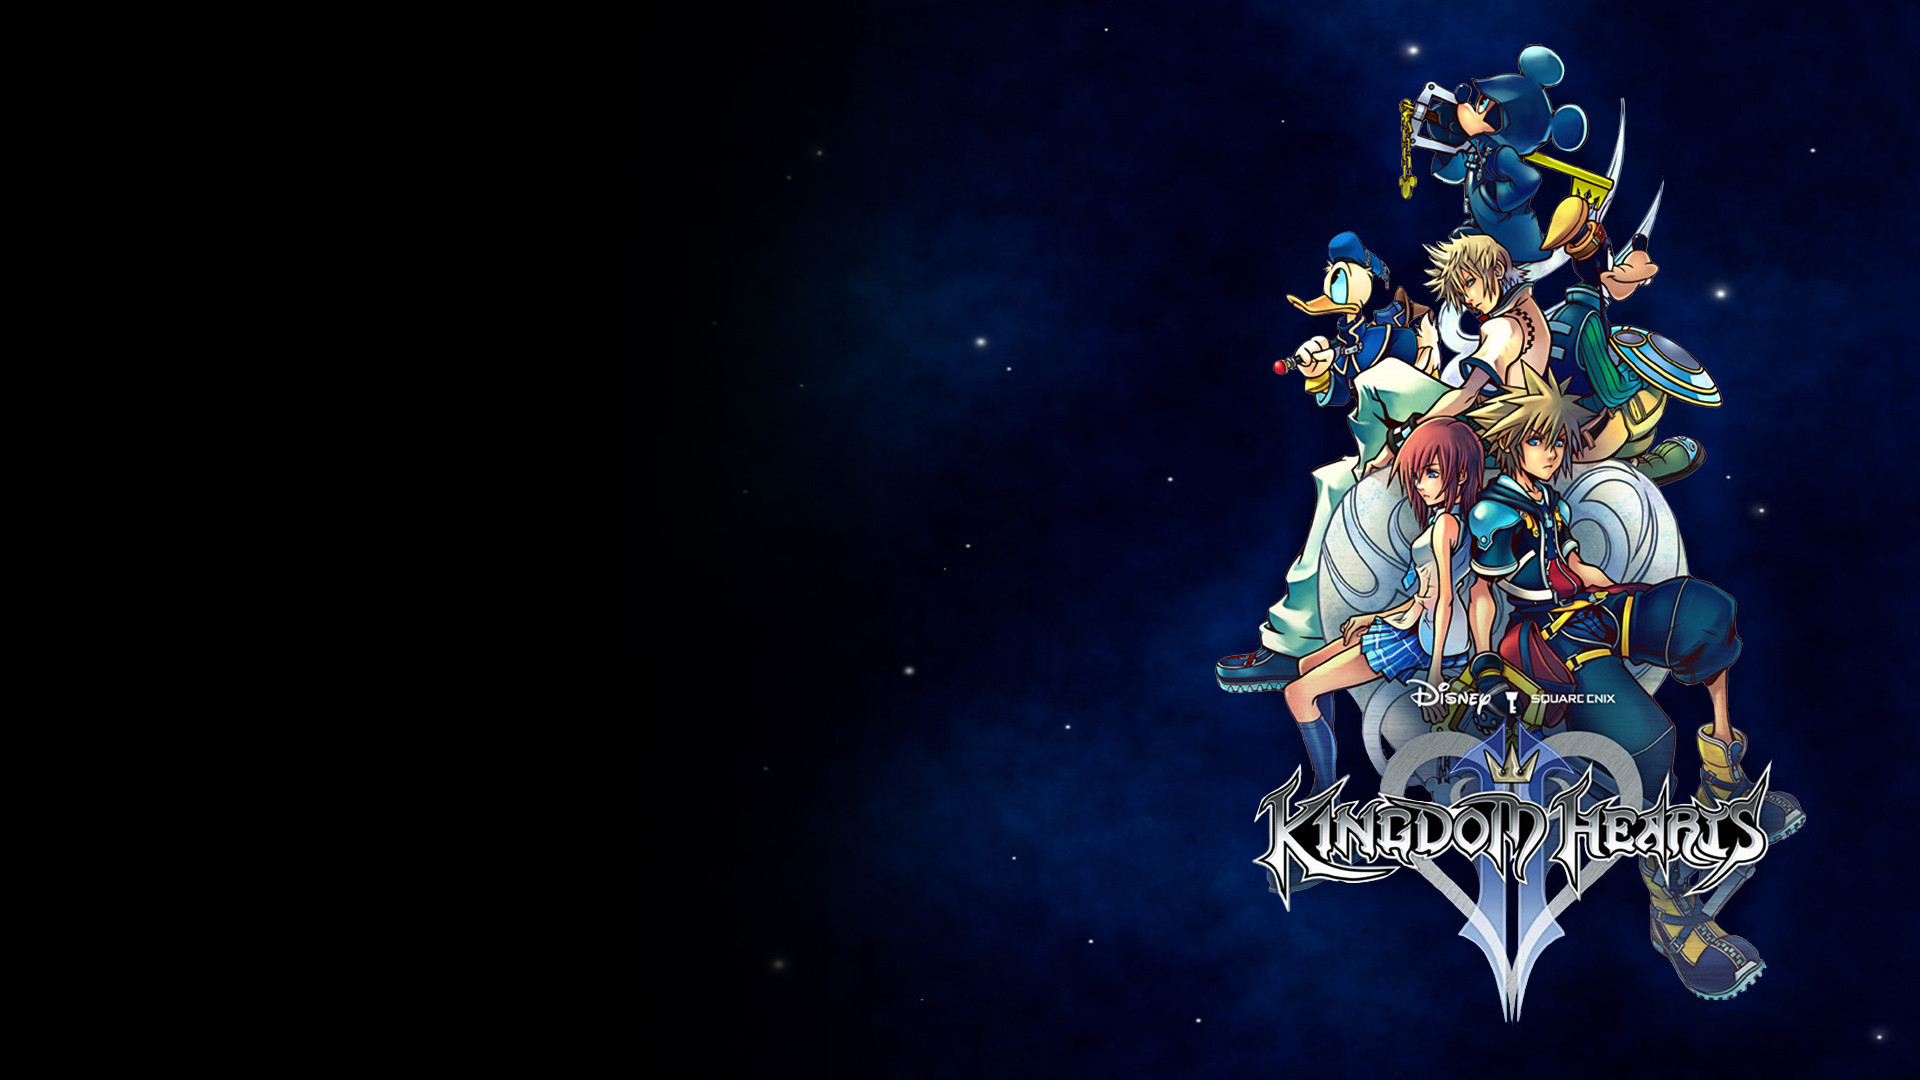 Here is a collection of Kingdom Hearts wallpapers that I compiled. Feel free to use them as your own wallpapers